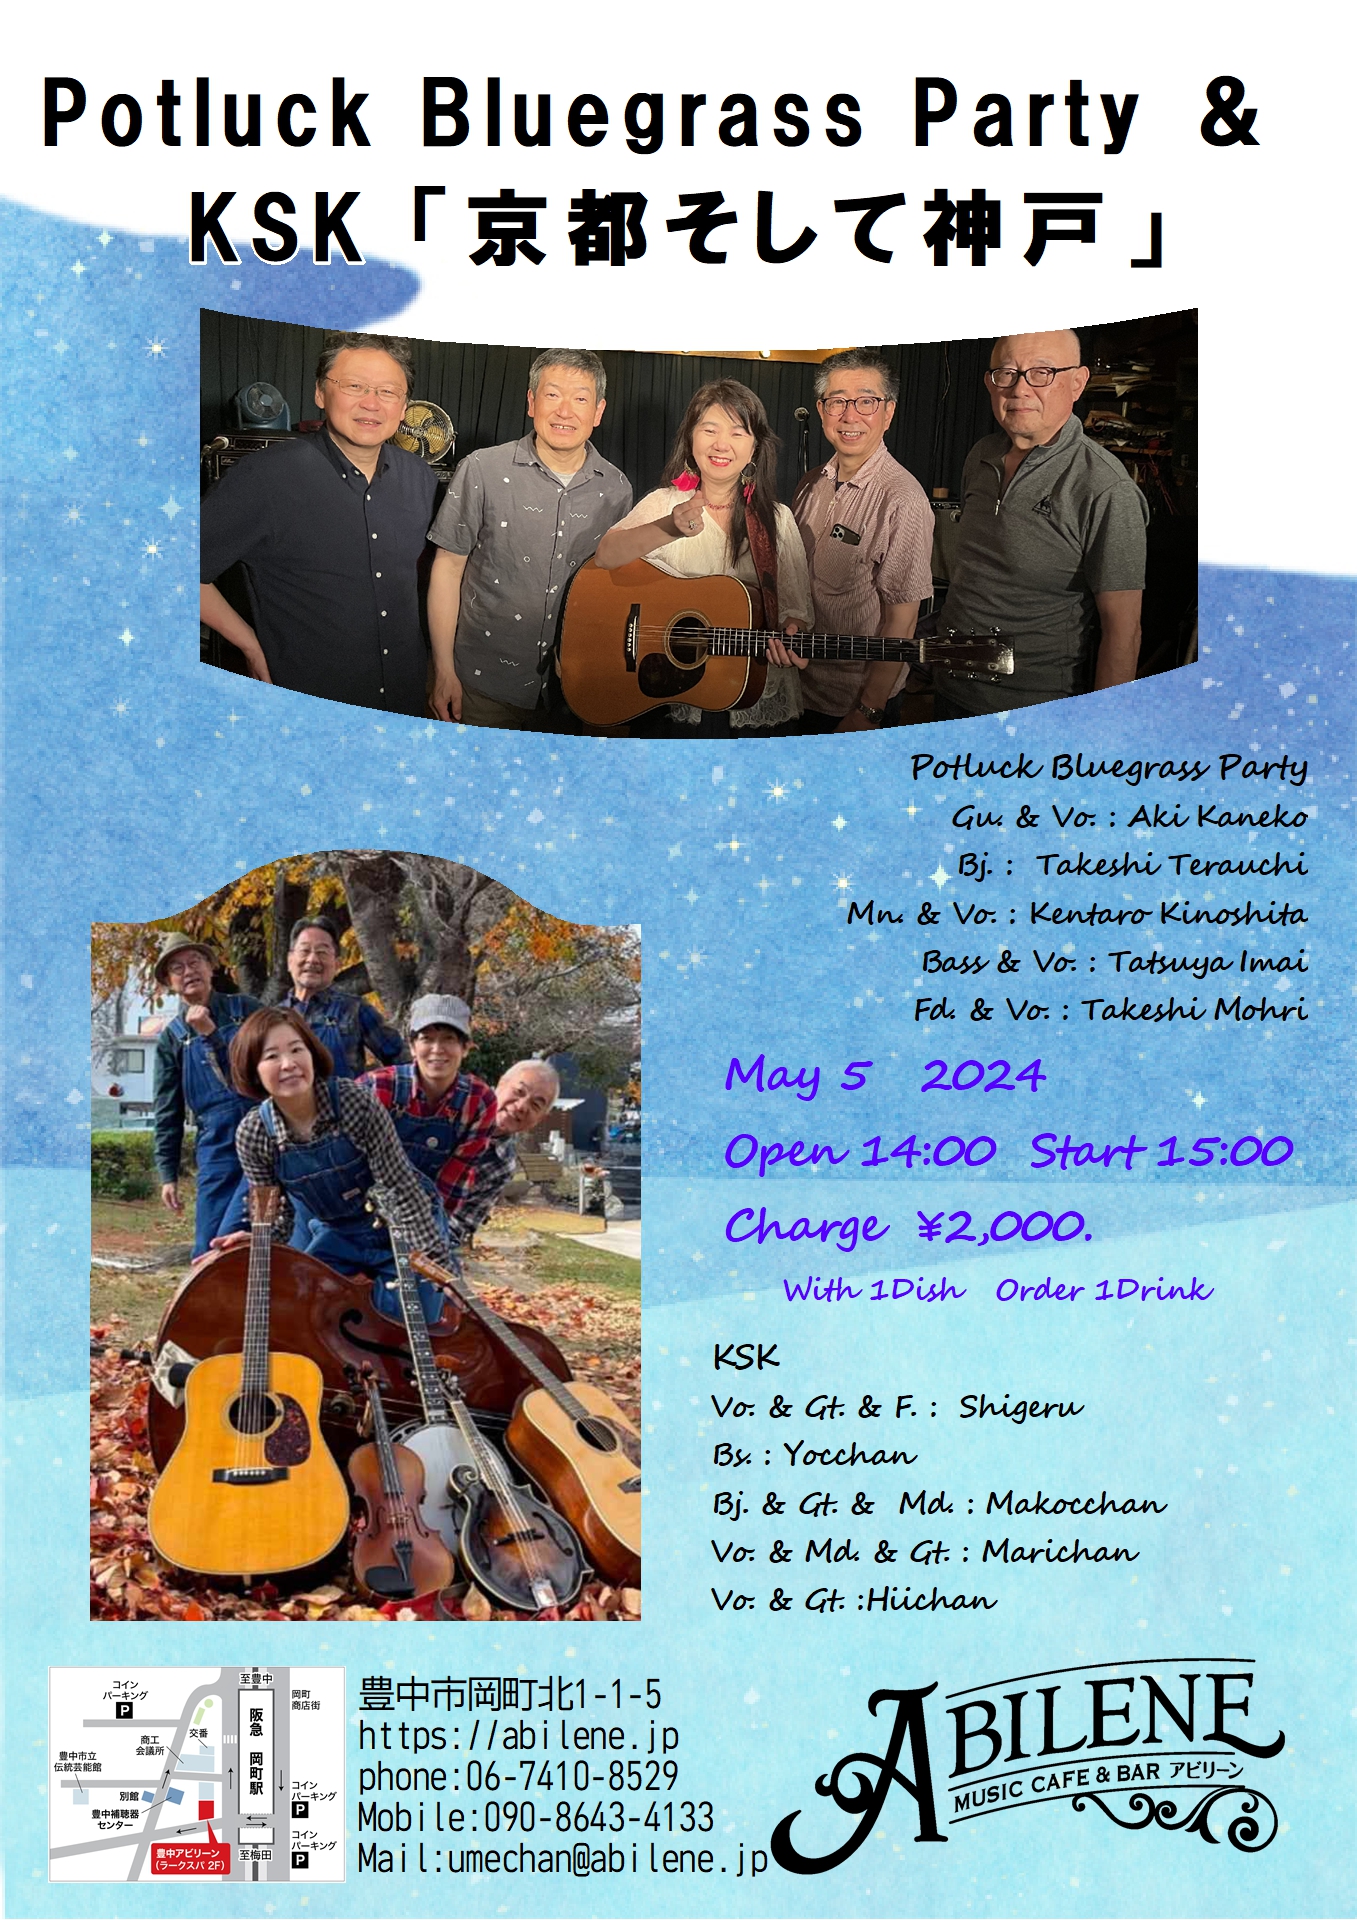 Potluck Bluegrass Party & KSK 「京都そして神戸」